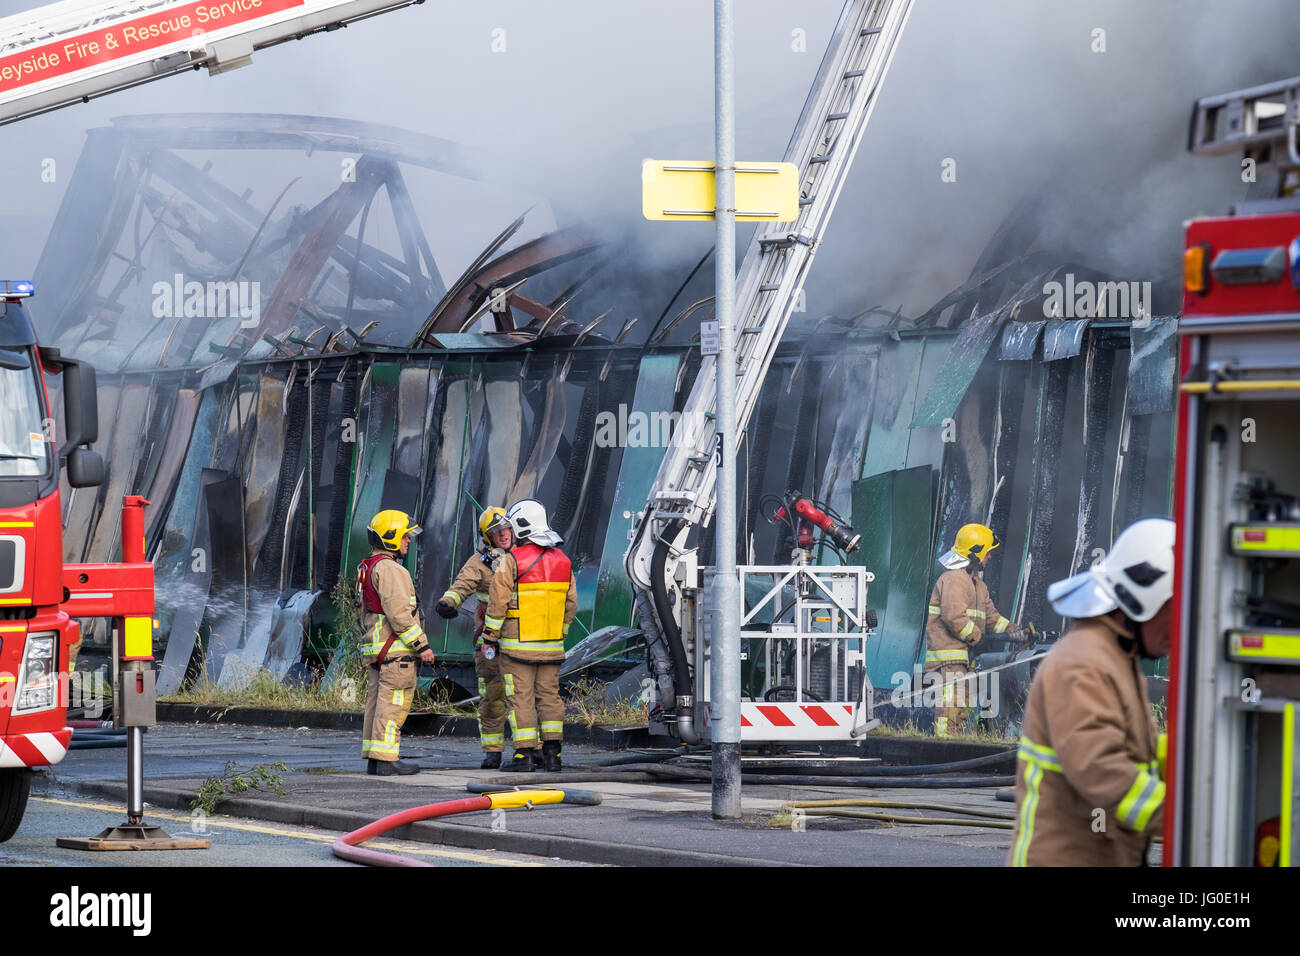 Merseyside, UK. 3rd July, 2017. A fire broke out at a paintball centre in St Helens on Merseyside on Monday, July 3, 2017 at around 5pm. All three emergency services attended the scene of the fire. © Christopher Middleton/Alamy Live News Stock Photo